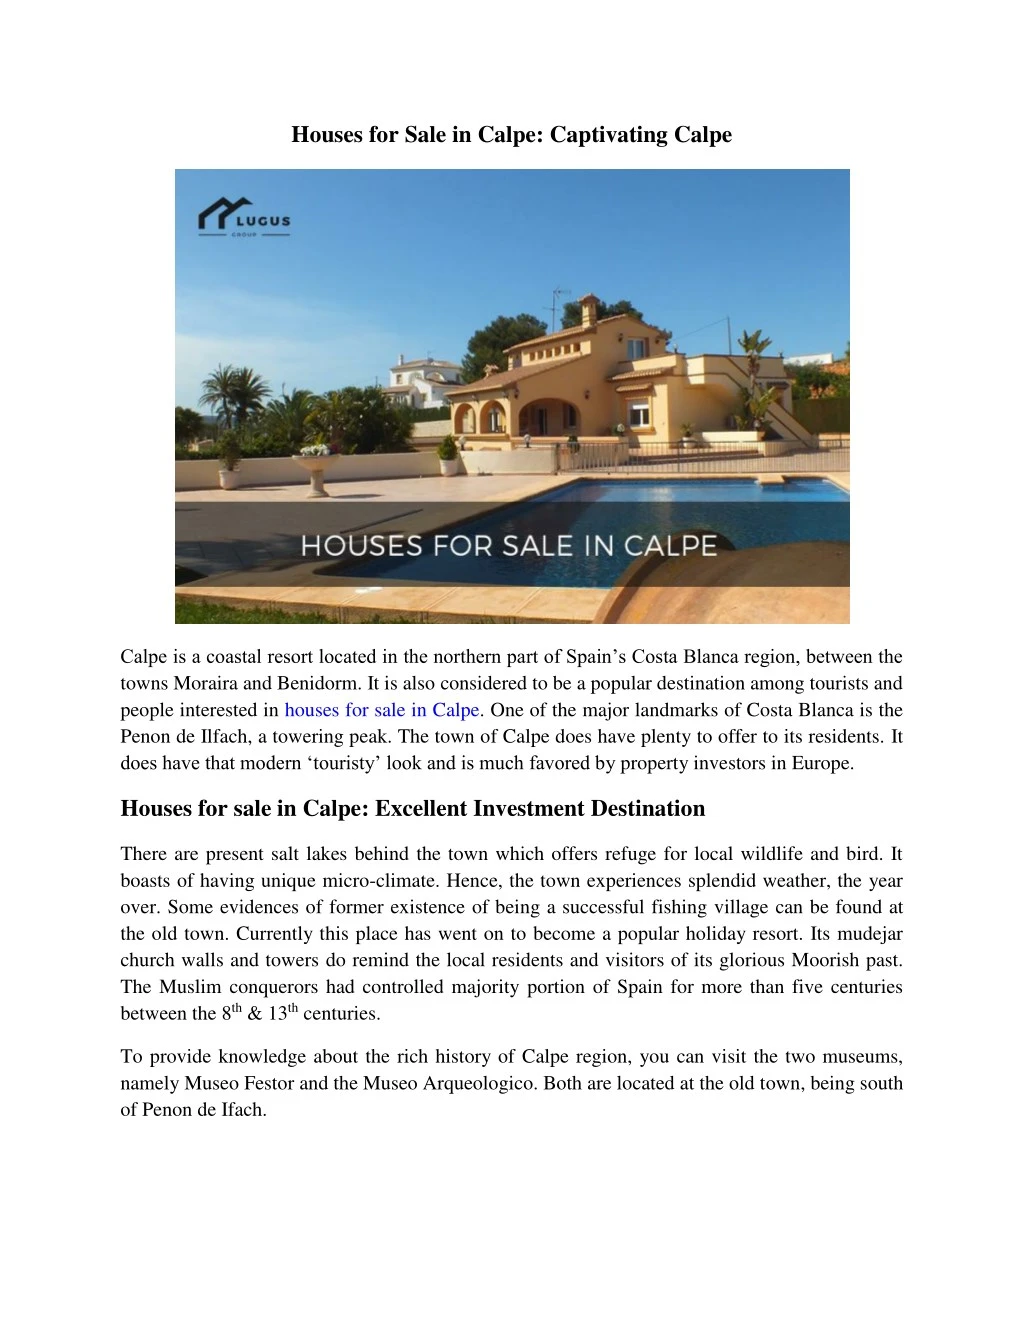 houses for sale in calpe captivating calpe